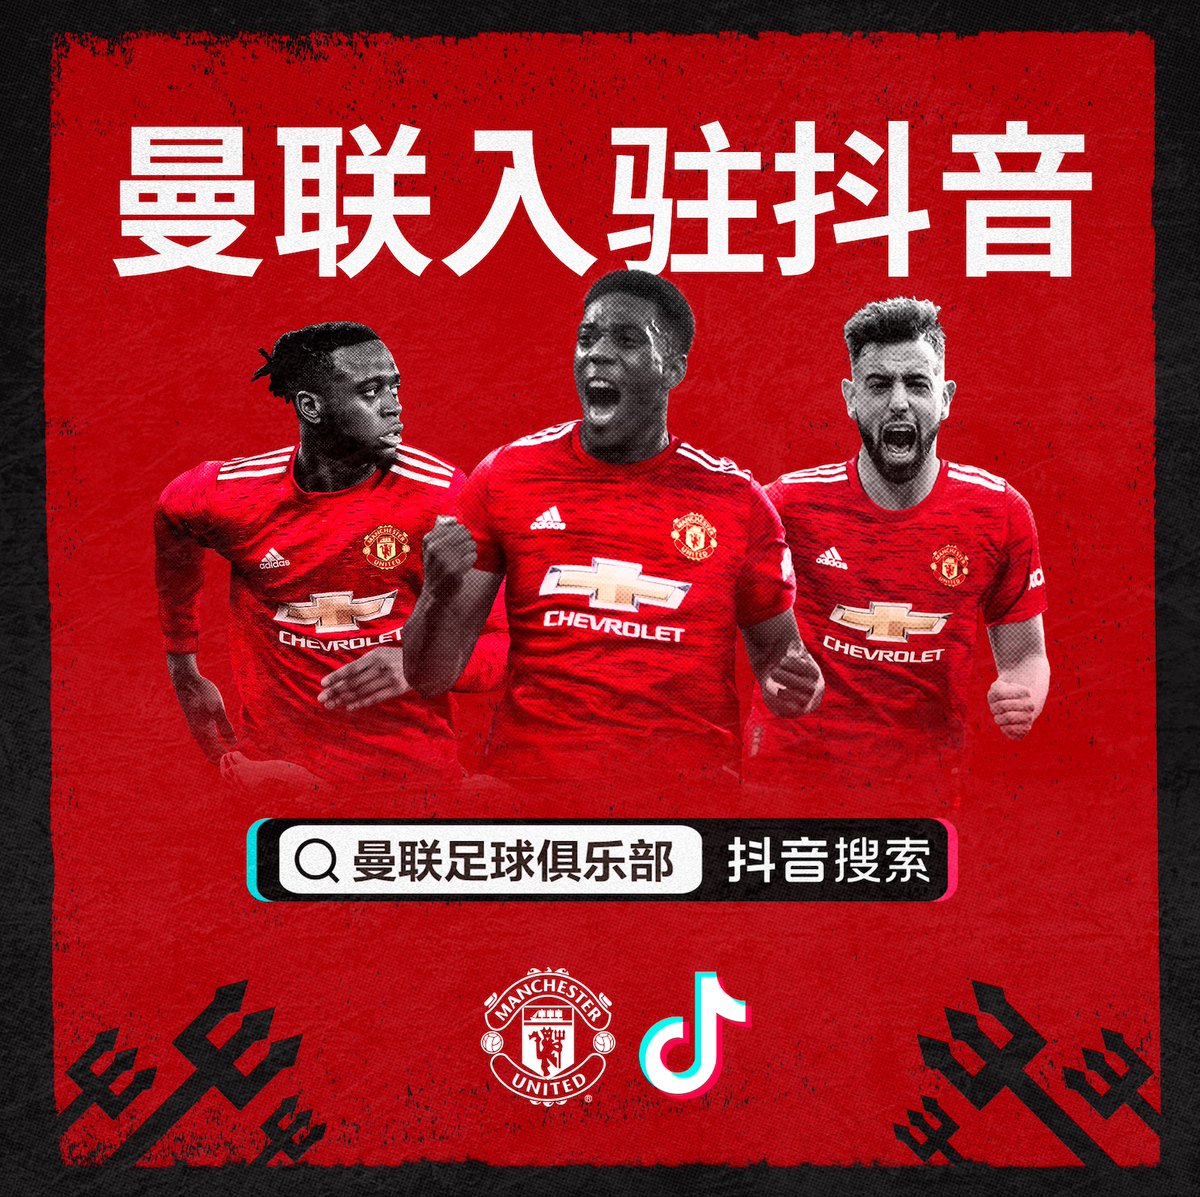 In China, where TikTok is not active and where Man Utd have a large following, the club will be launching on Douyin, the Chinese equivalent of TikTok, as part of a wider partnership with Bytedance. Man Utd became the first football club to reach 10M followers on Weibo earlier